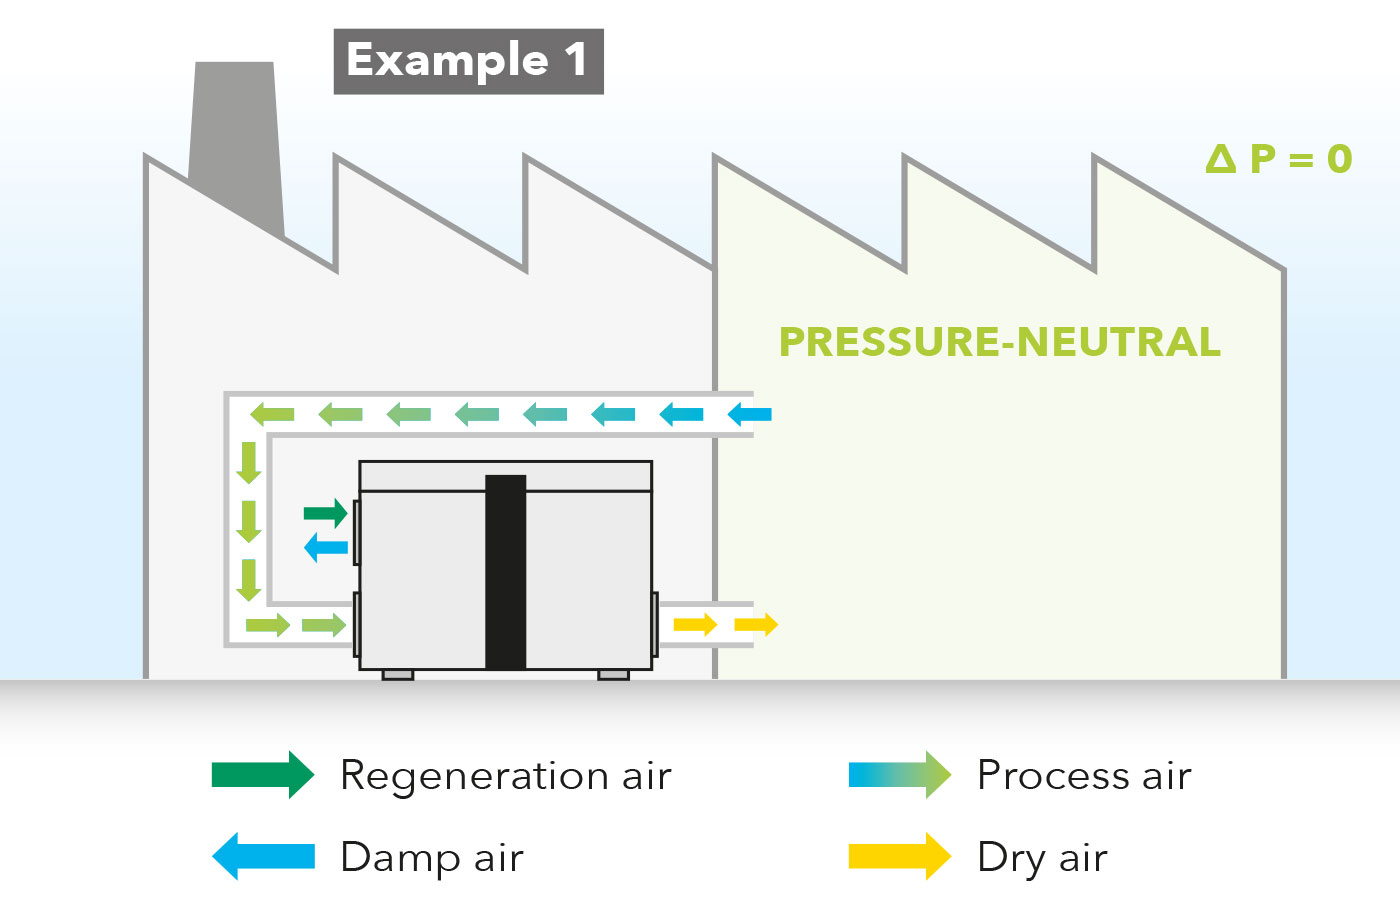 Pressure-neutral recirculation operation when installed outdoors